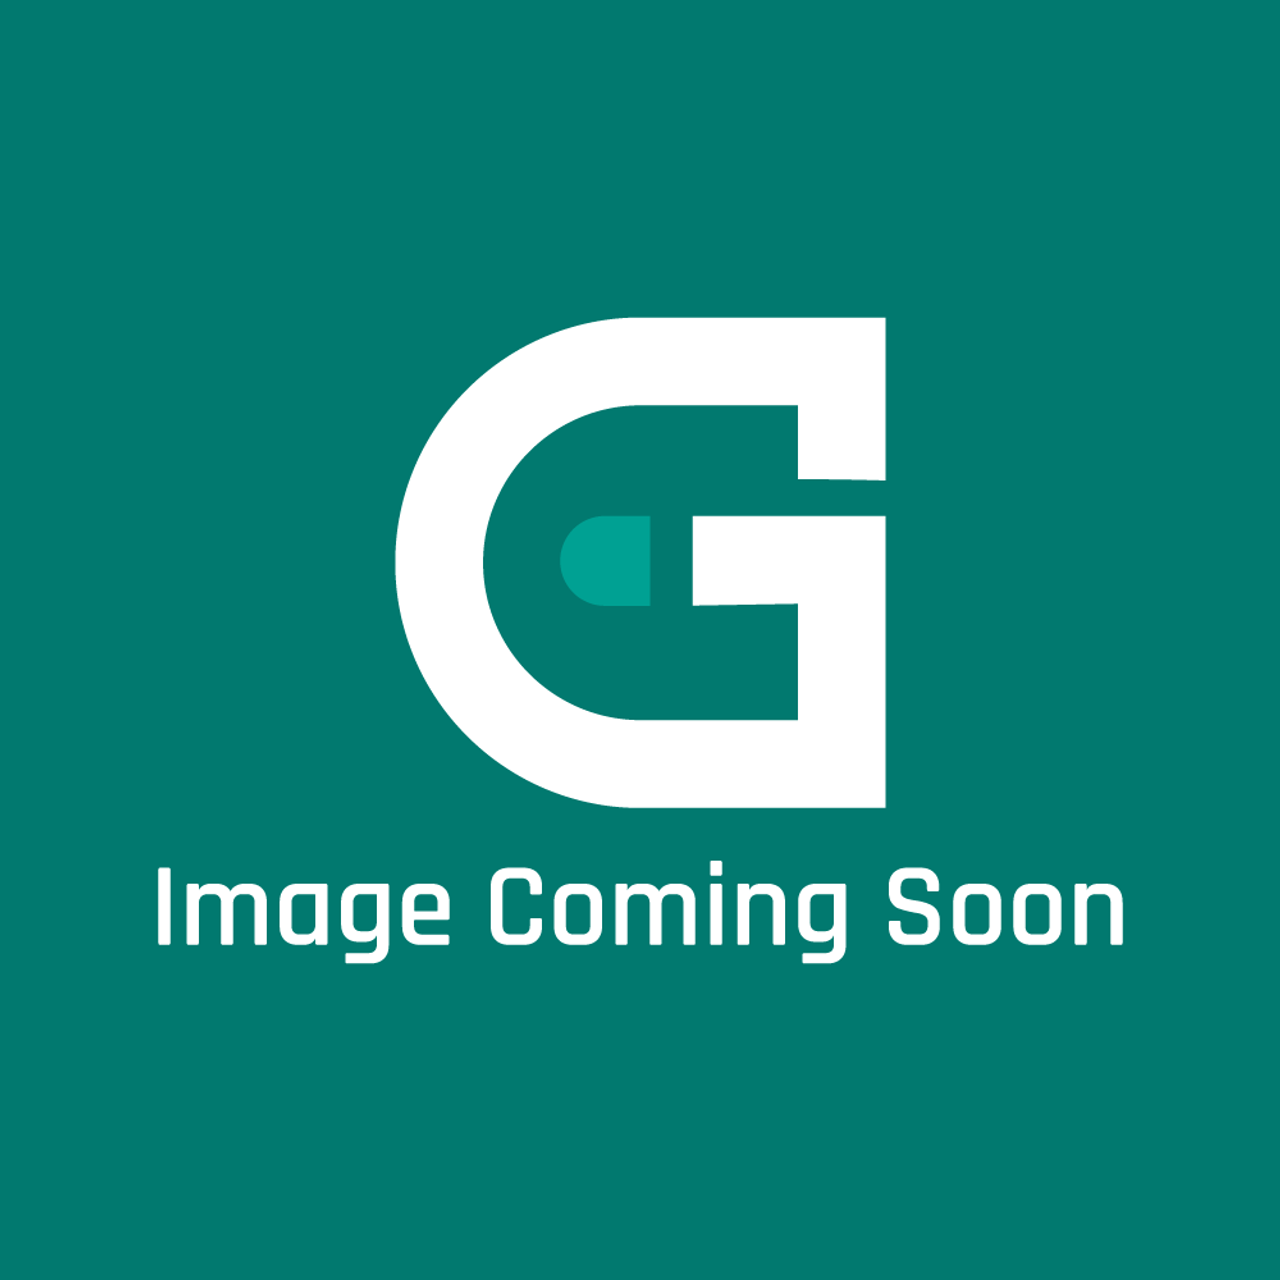 GE Appliances WB56X35479 - Stainless Outer Door - Image Coming Soon!